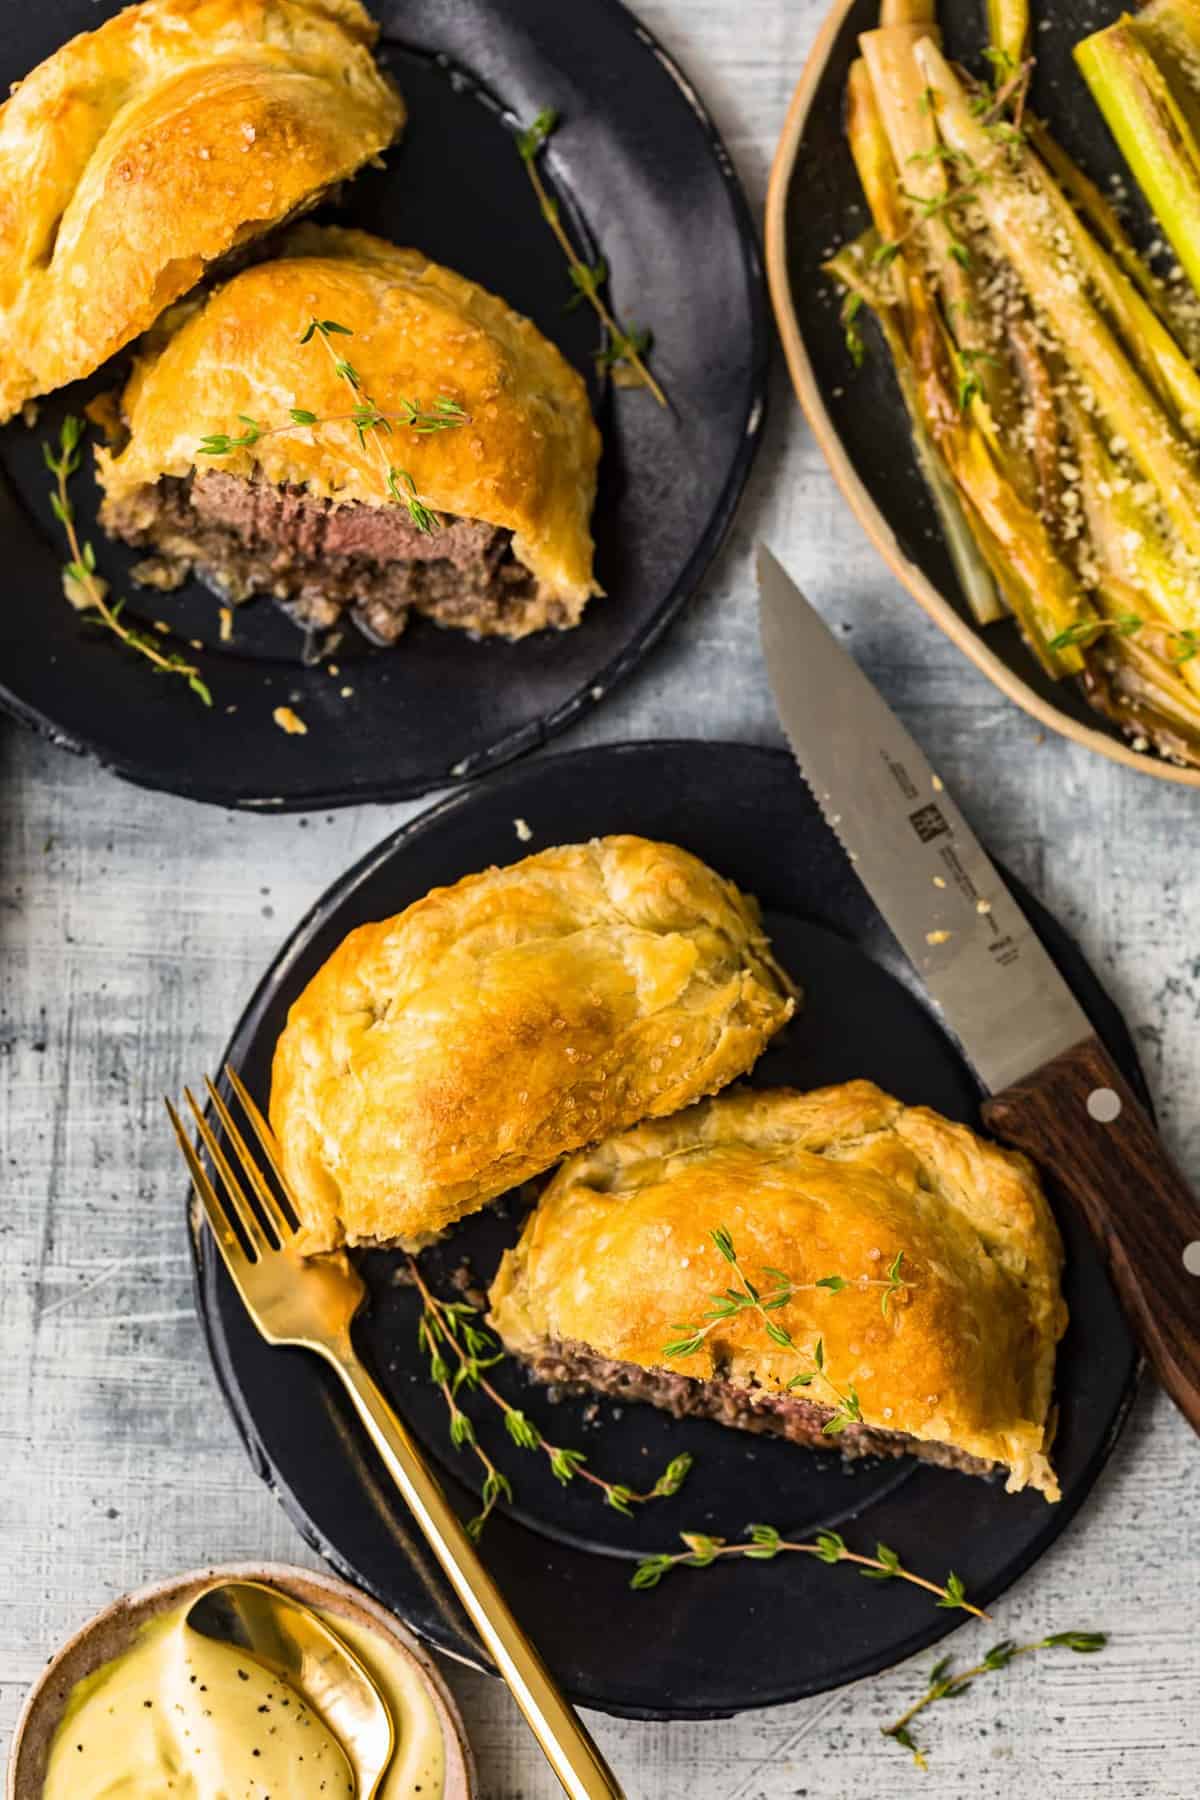 Beef wellingtons served on two black plates